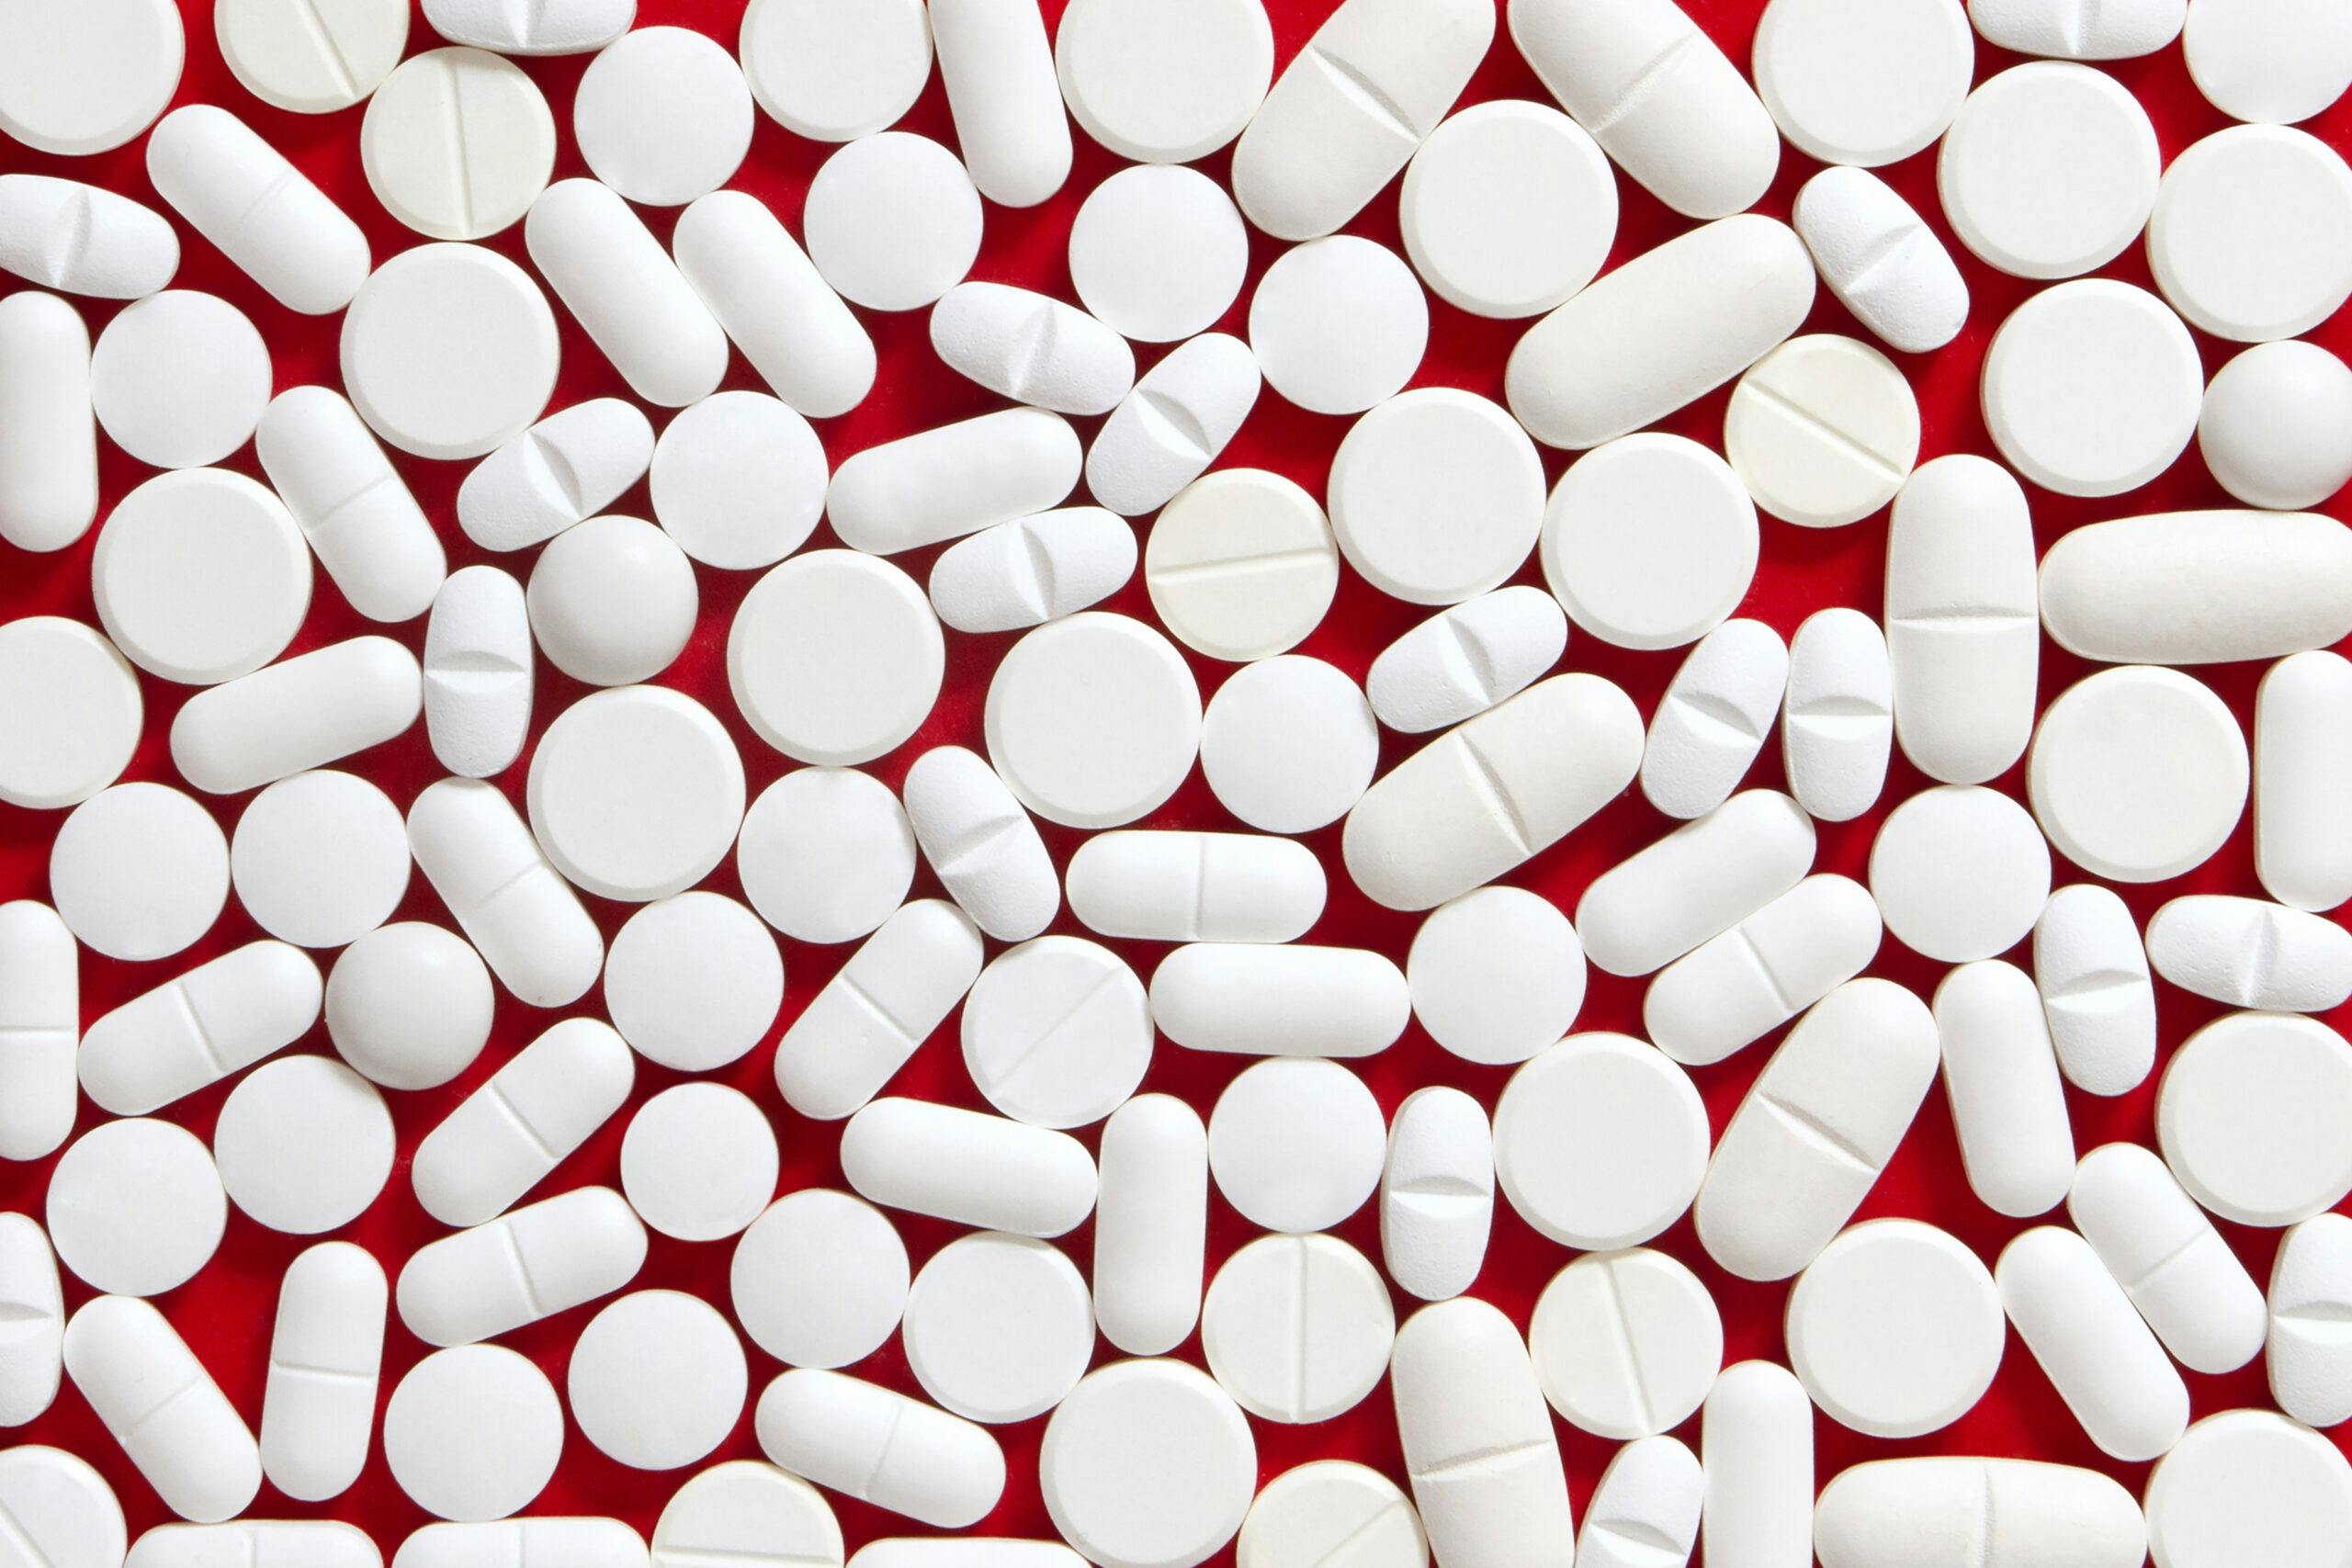 assortment of white pills on red background